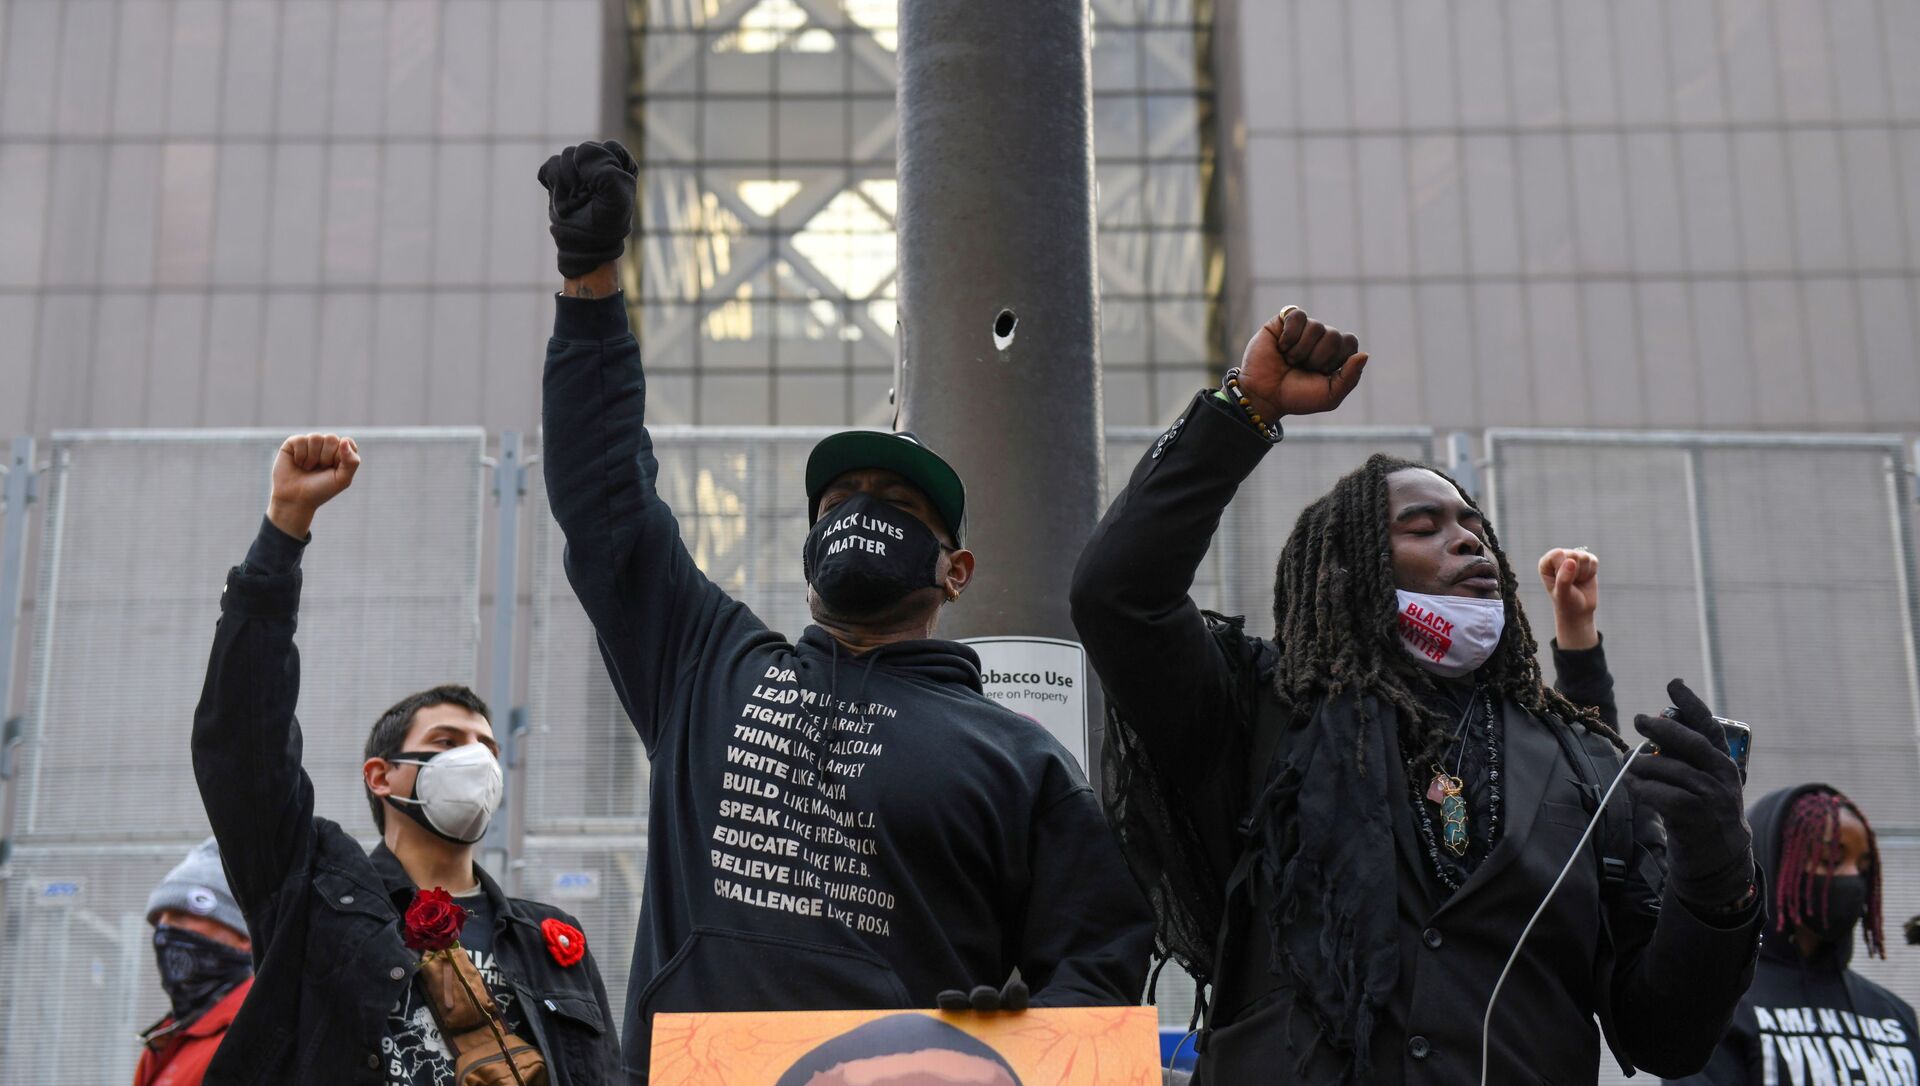 Protesters raise their fists and chant after the I Can't Breathe  Silent March for Justice a day before jury selection is scheduled to begin for the trial of Derek Chauvin, the former Minneapolis policeman accused of killing George Floyd, in Minneapolis, Minnesota, U.S. 7 March 2021 - Sputnik International, 1920, 19.04.2021